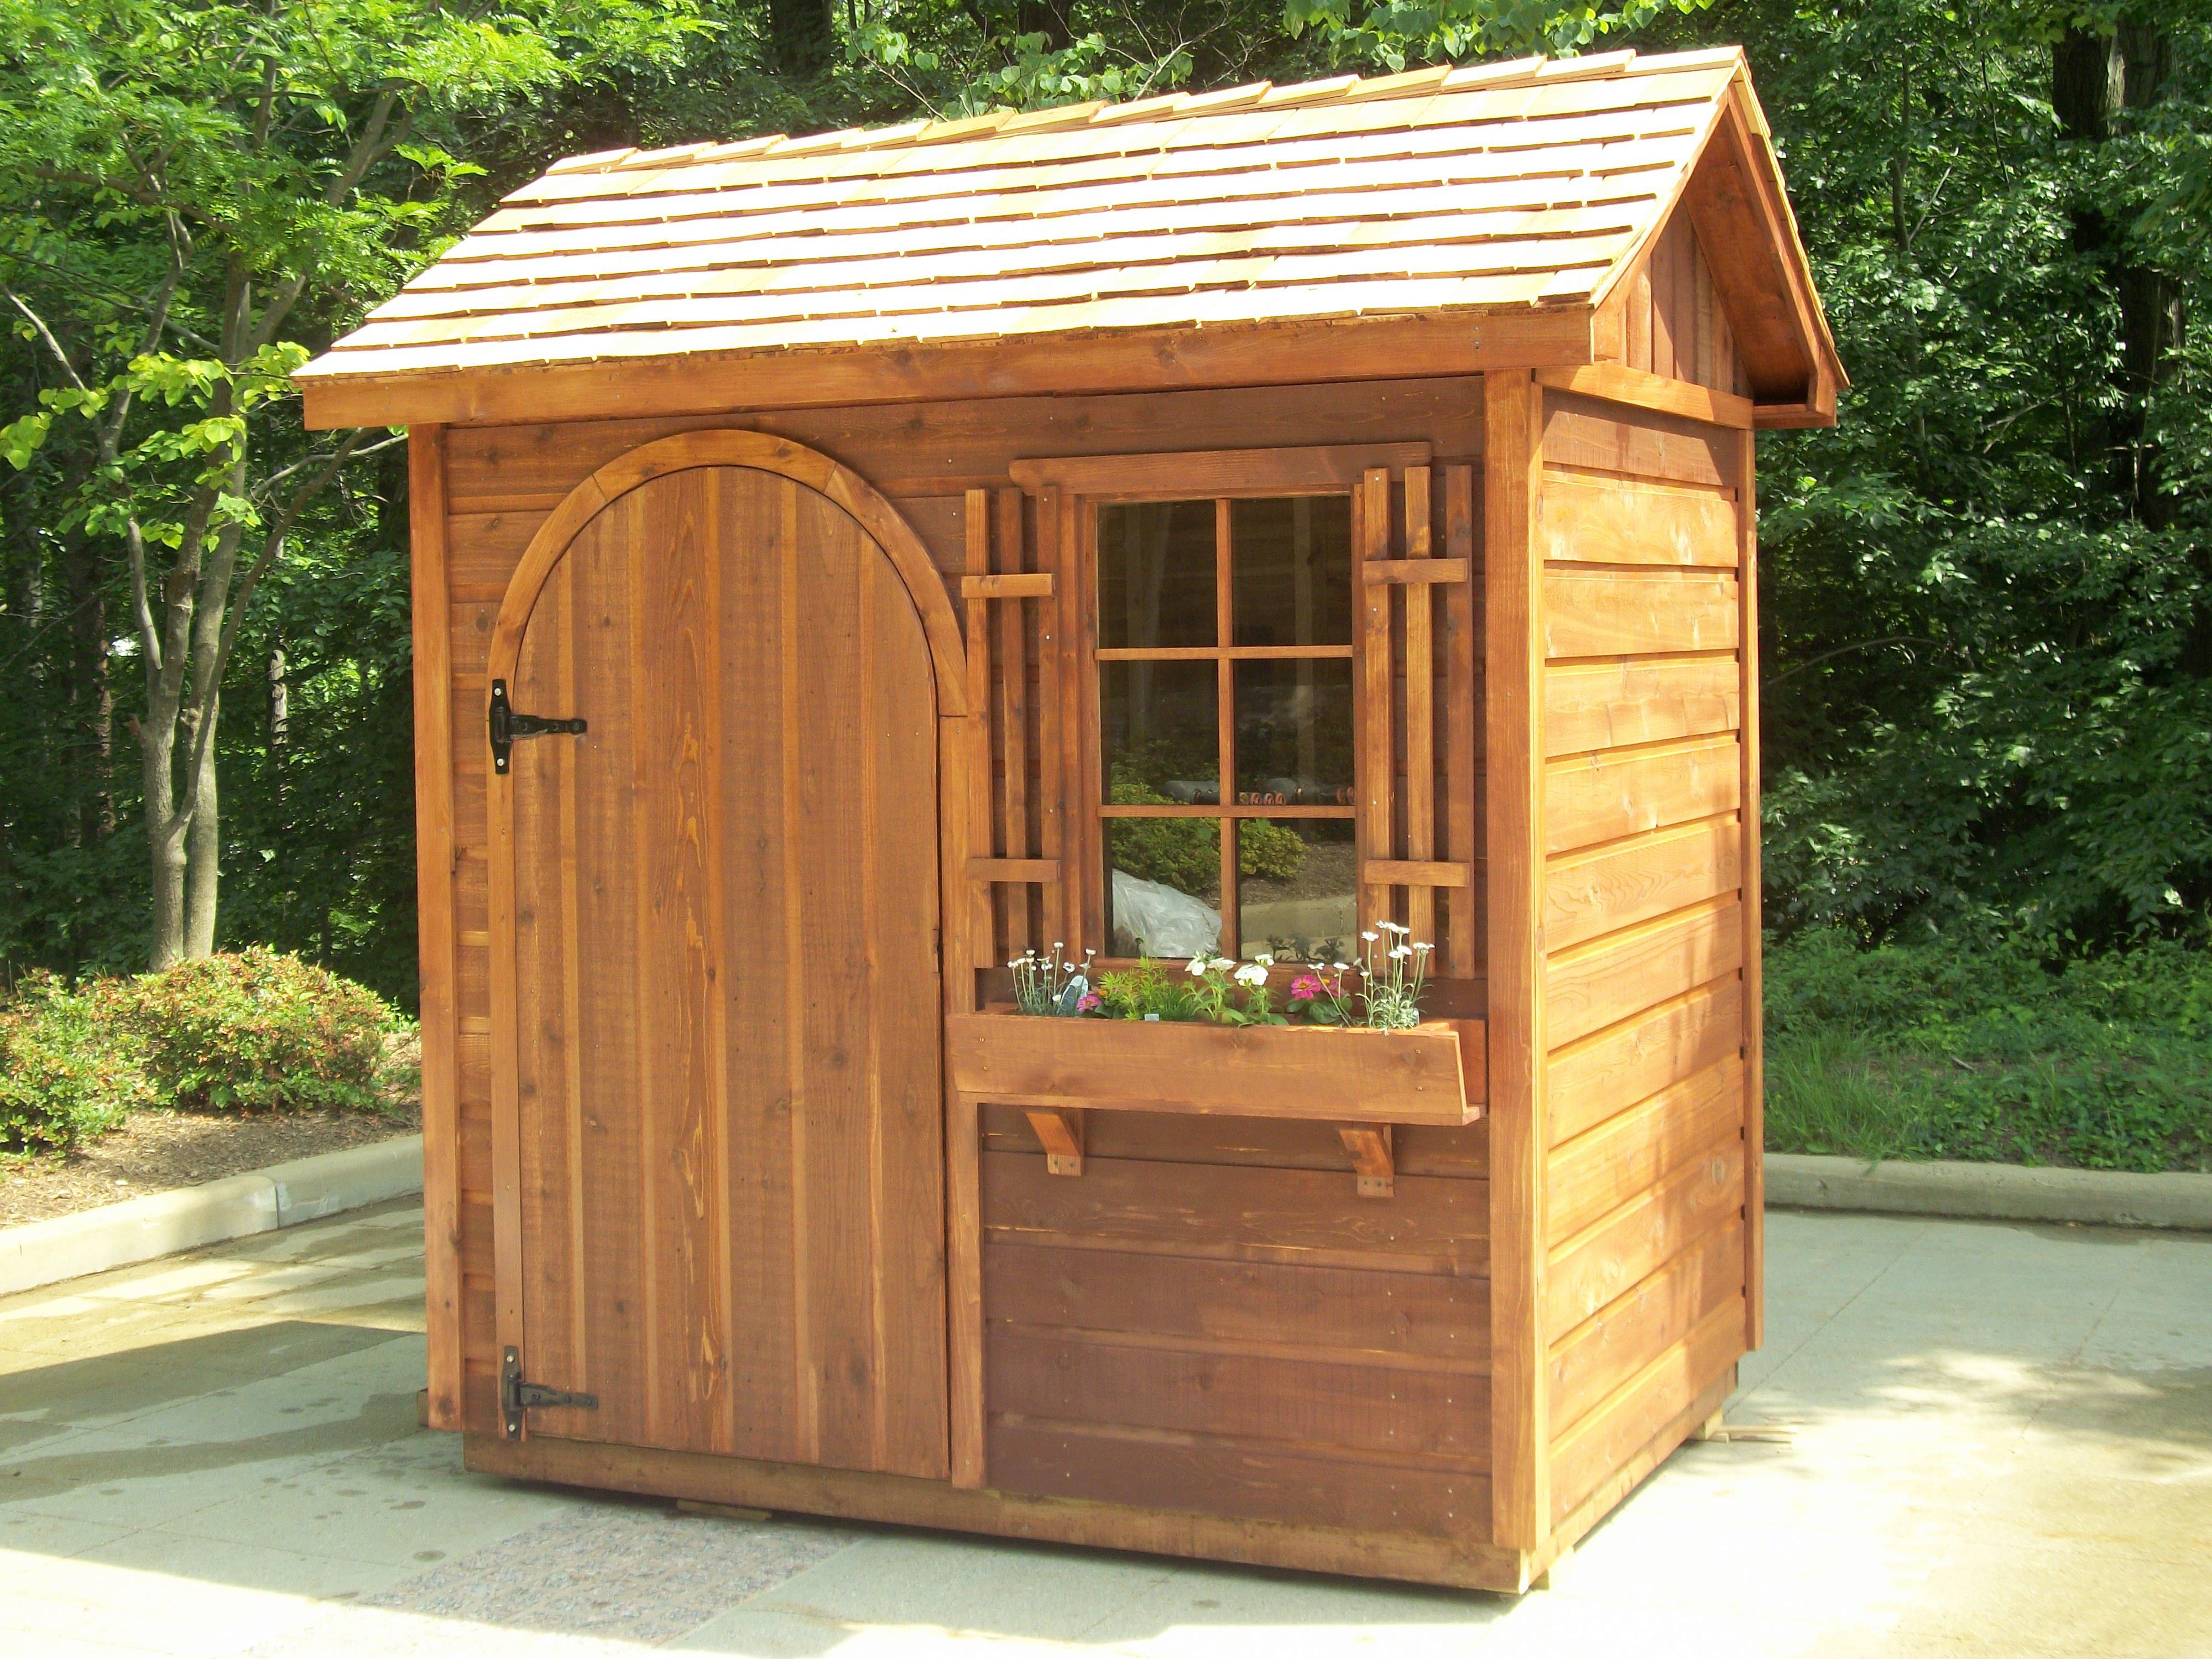 Palmerston shed kit 5x7 with arched single door in McLean Virginia. ID number 128807-1.